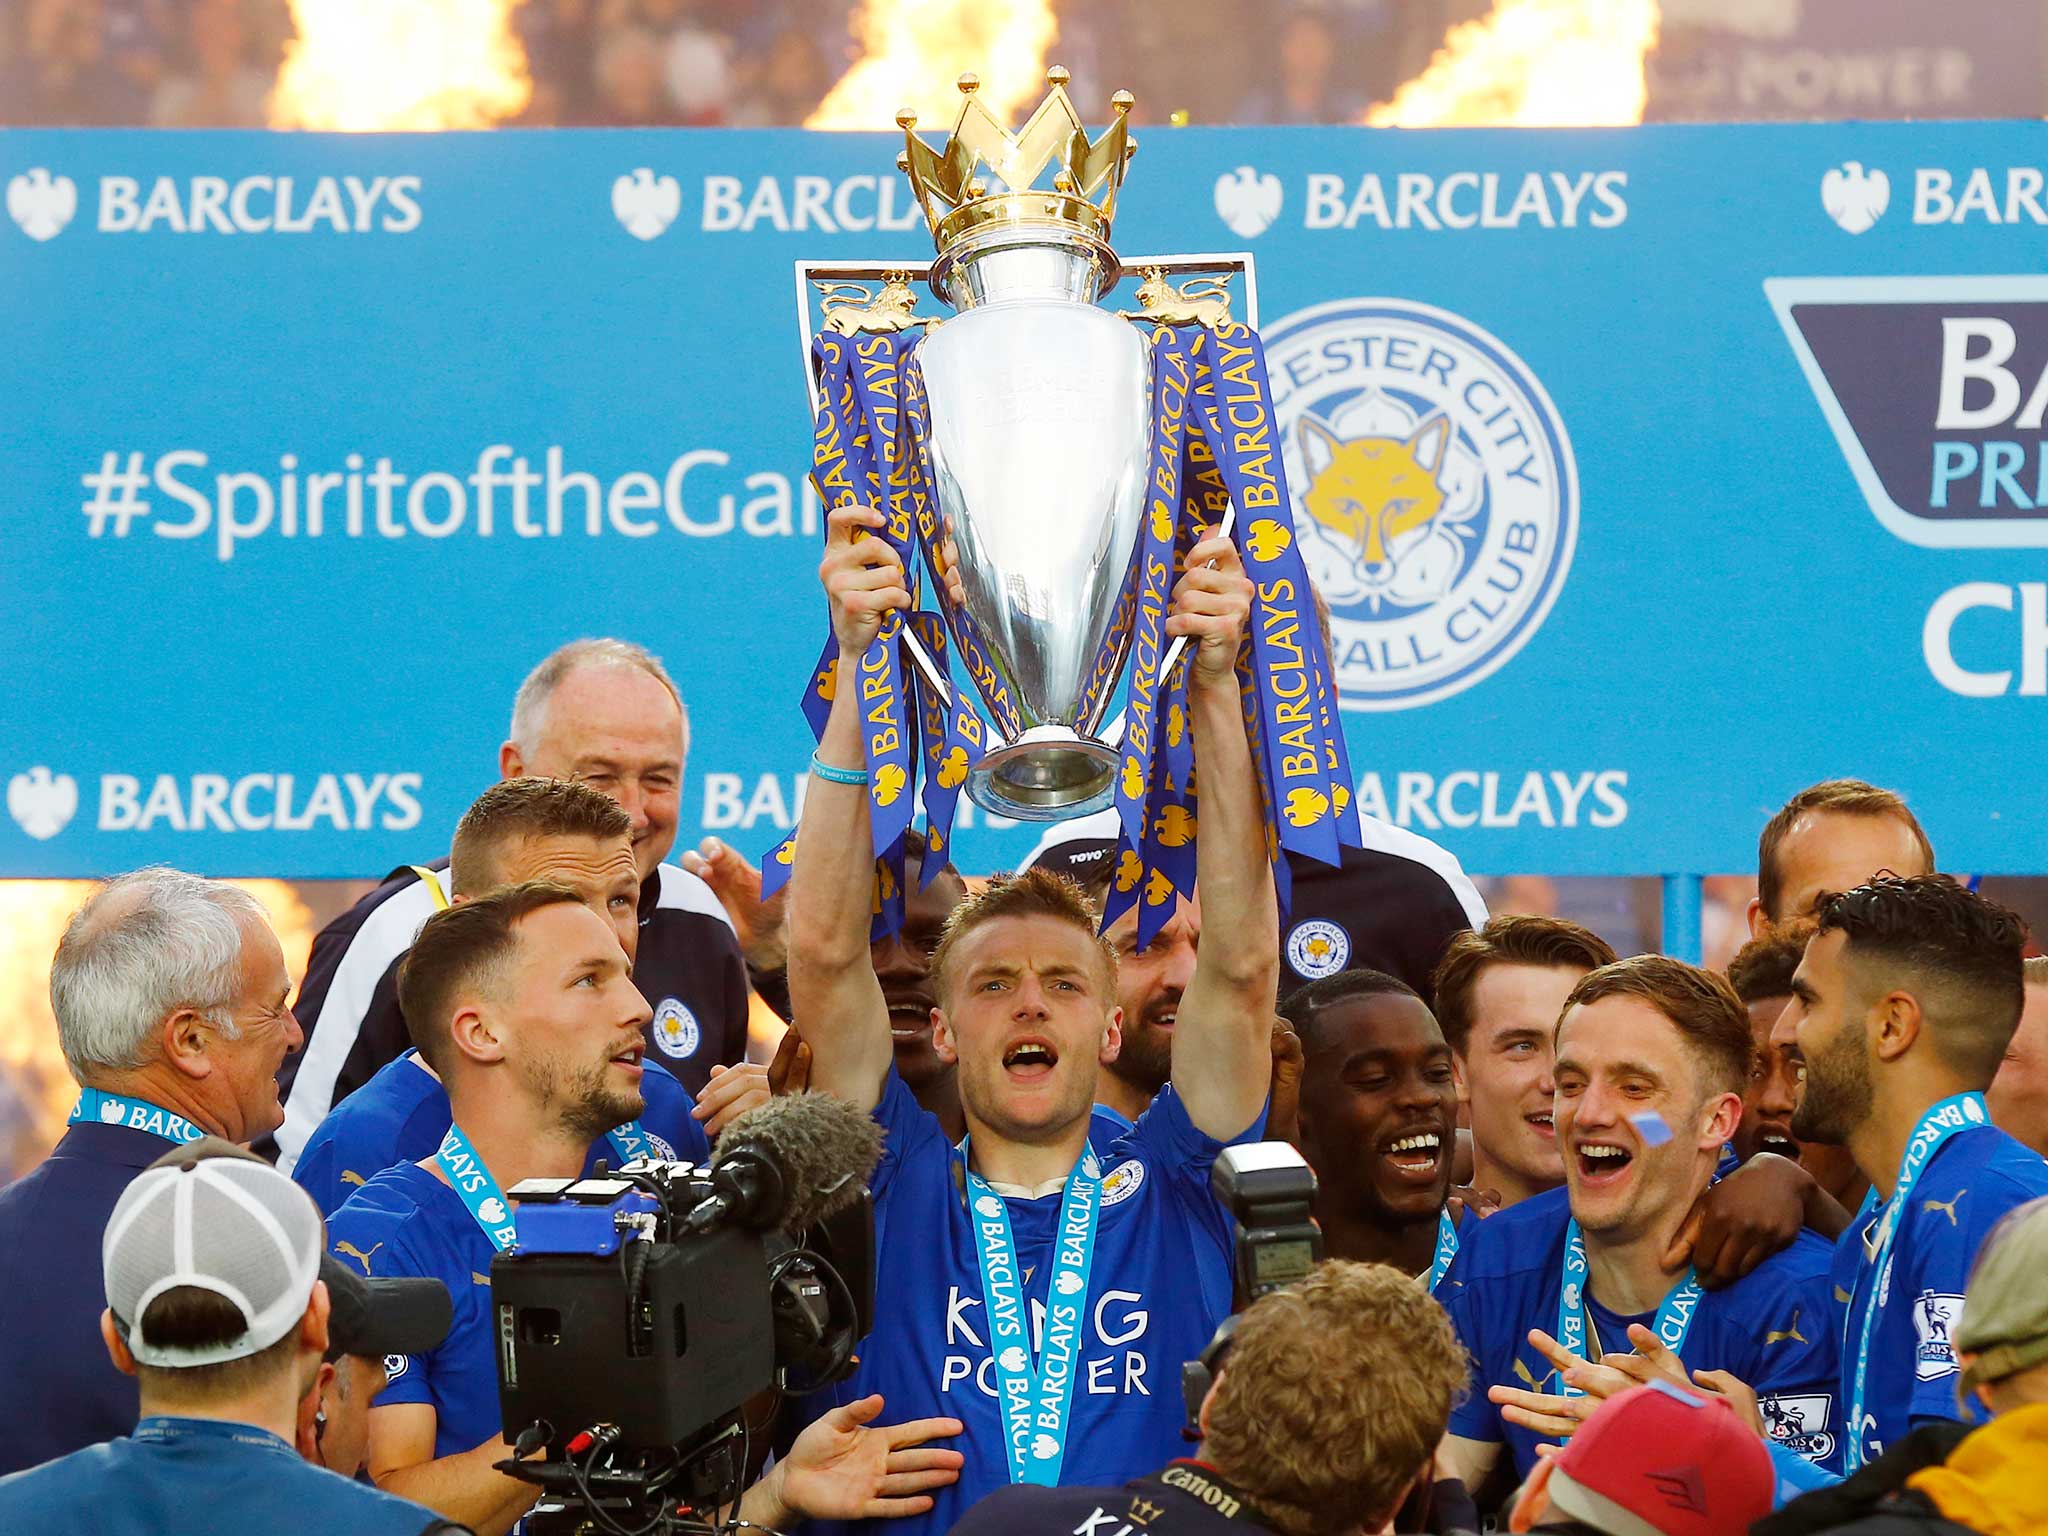 Leicester City's unlikely title triumph was just the tip of an iceberg in another unpredictable Premier League campaign